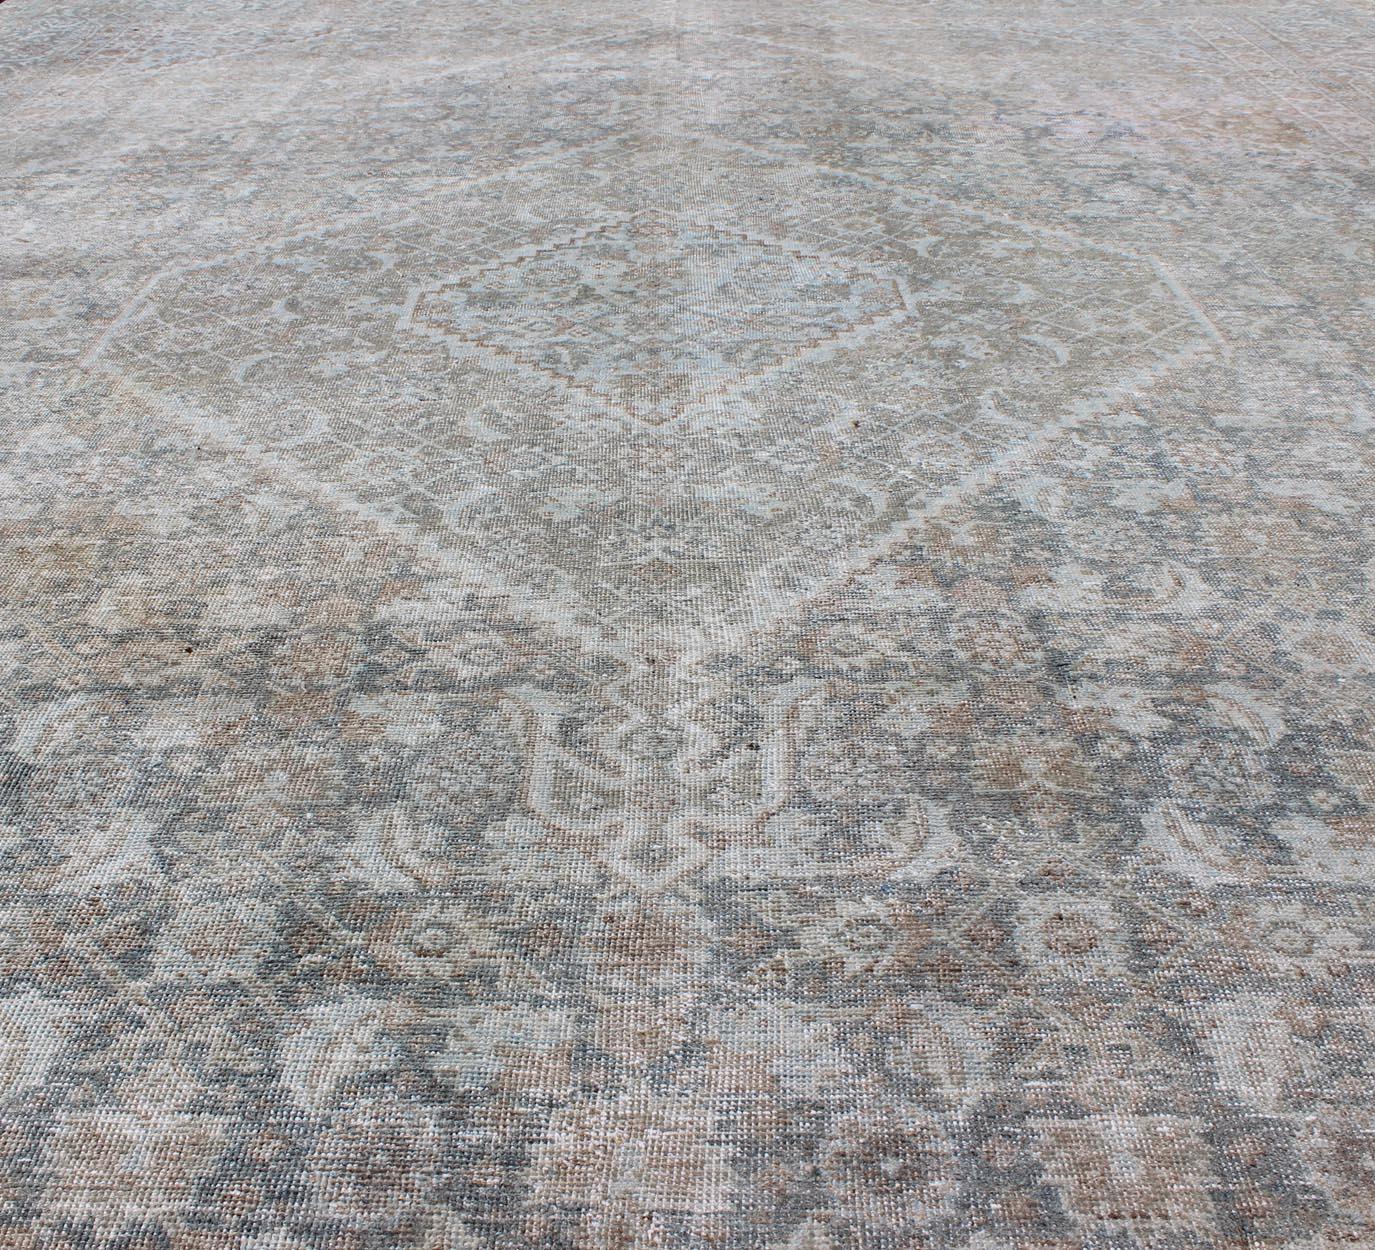 Antique Persian Tabriz Rug in Muted Colors with Layered Medallion Design 5